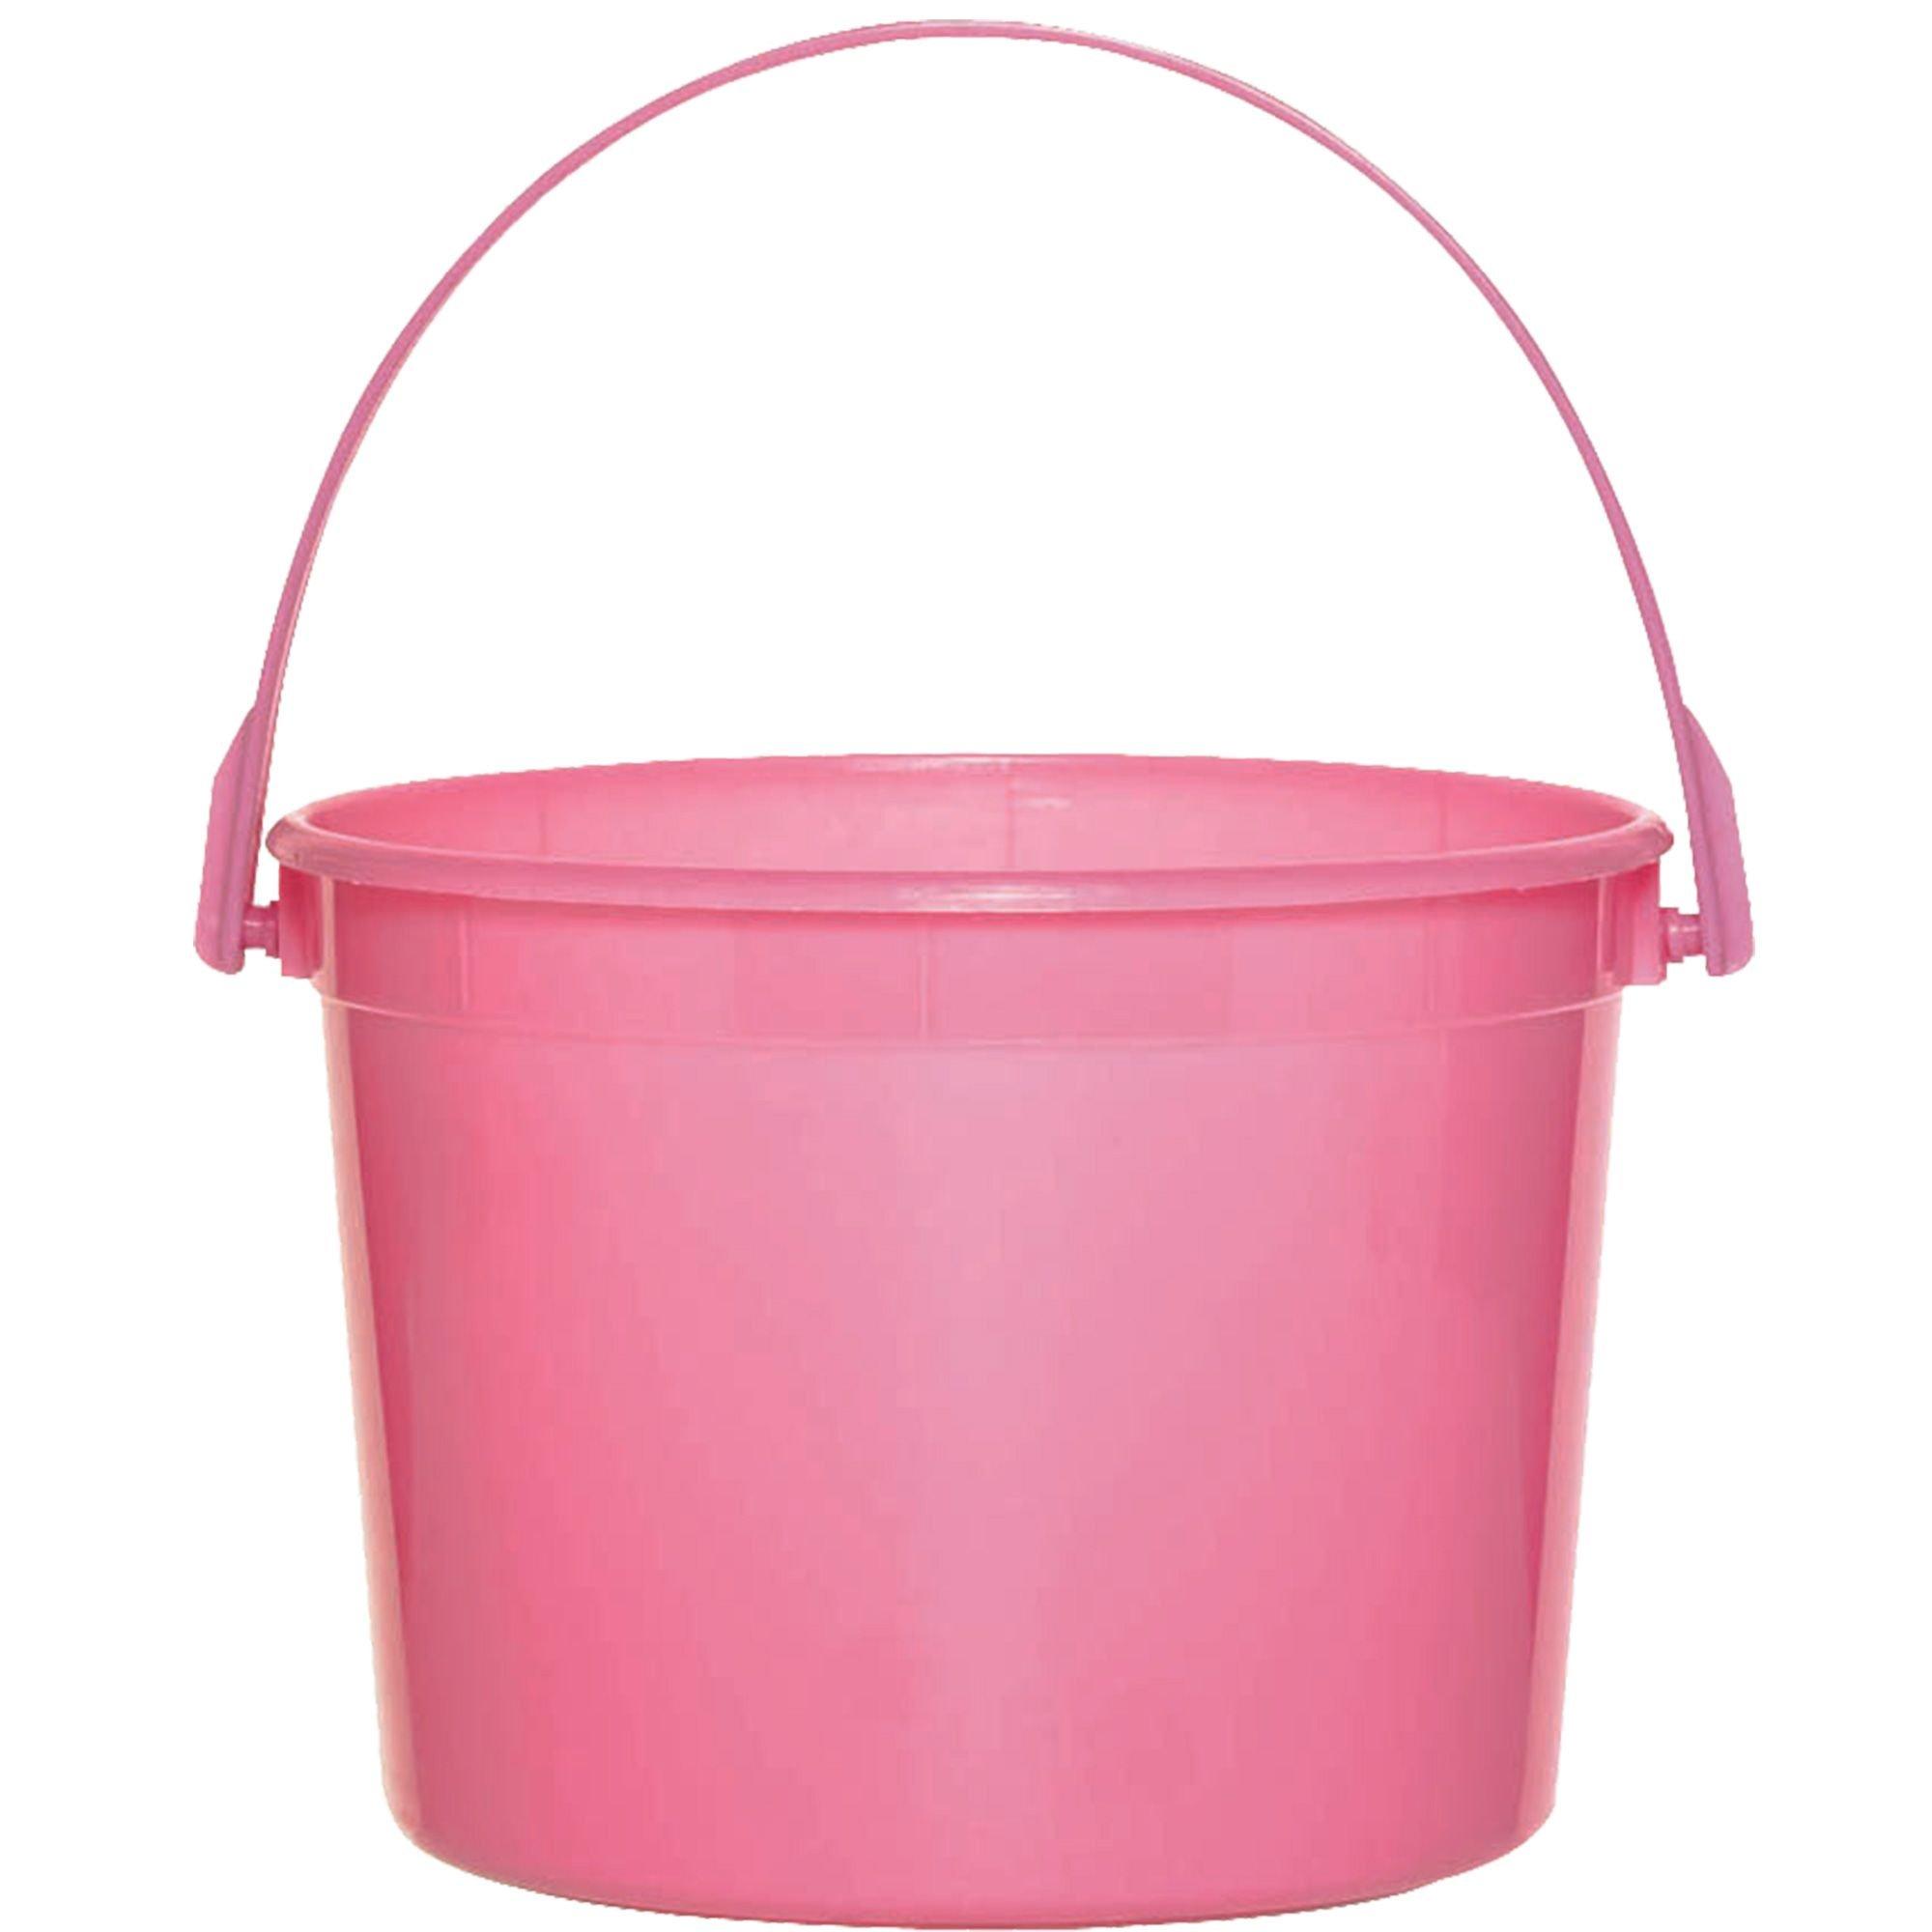 Introducing plastic bucket container + the best purchase price